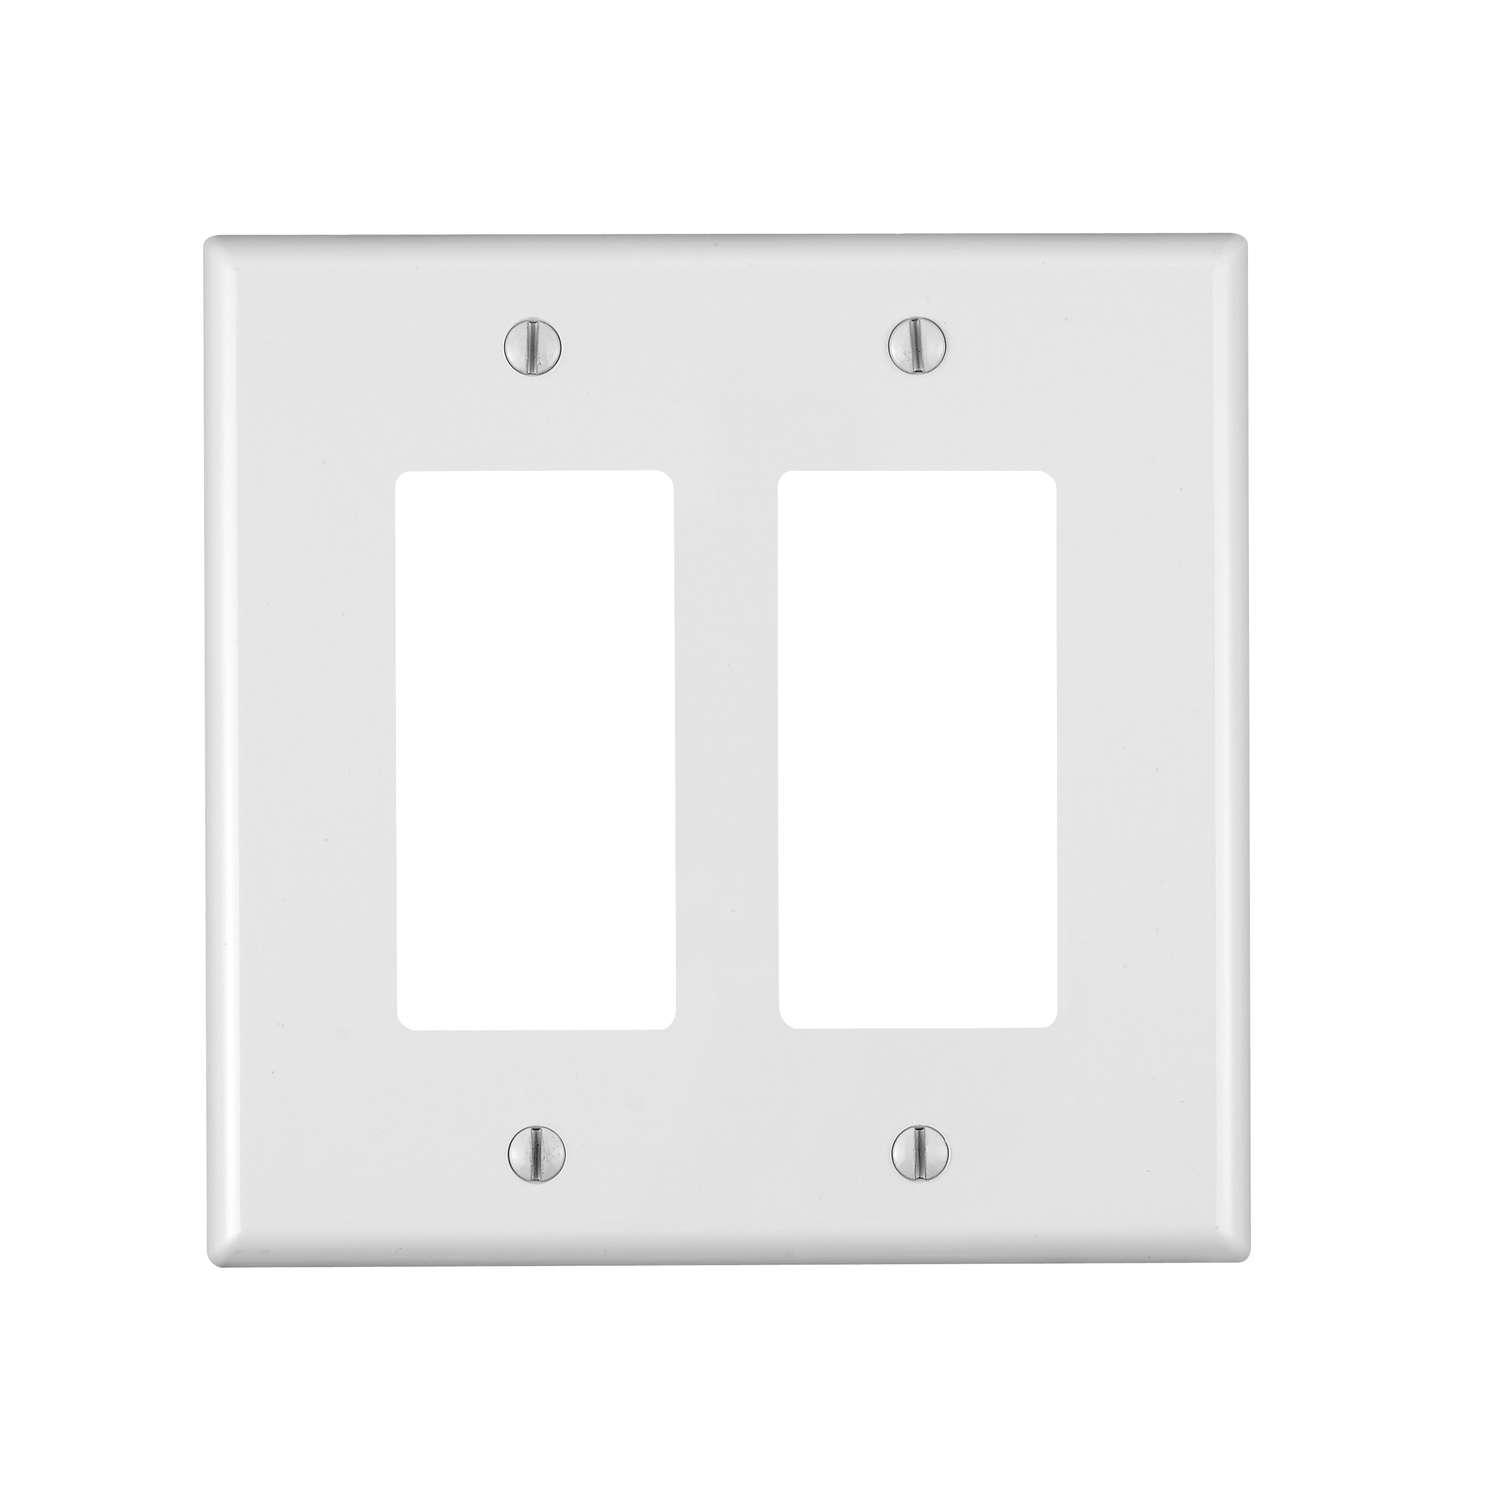 10 Pk Leviton Almond Plastic Oversized Outlet Wall Plate Cover R56-78103-00T 